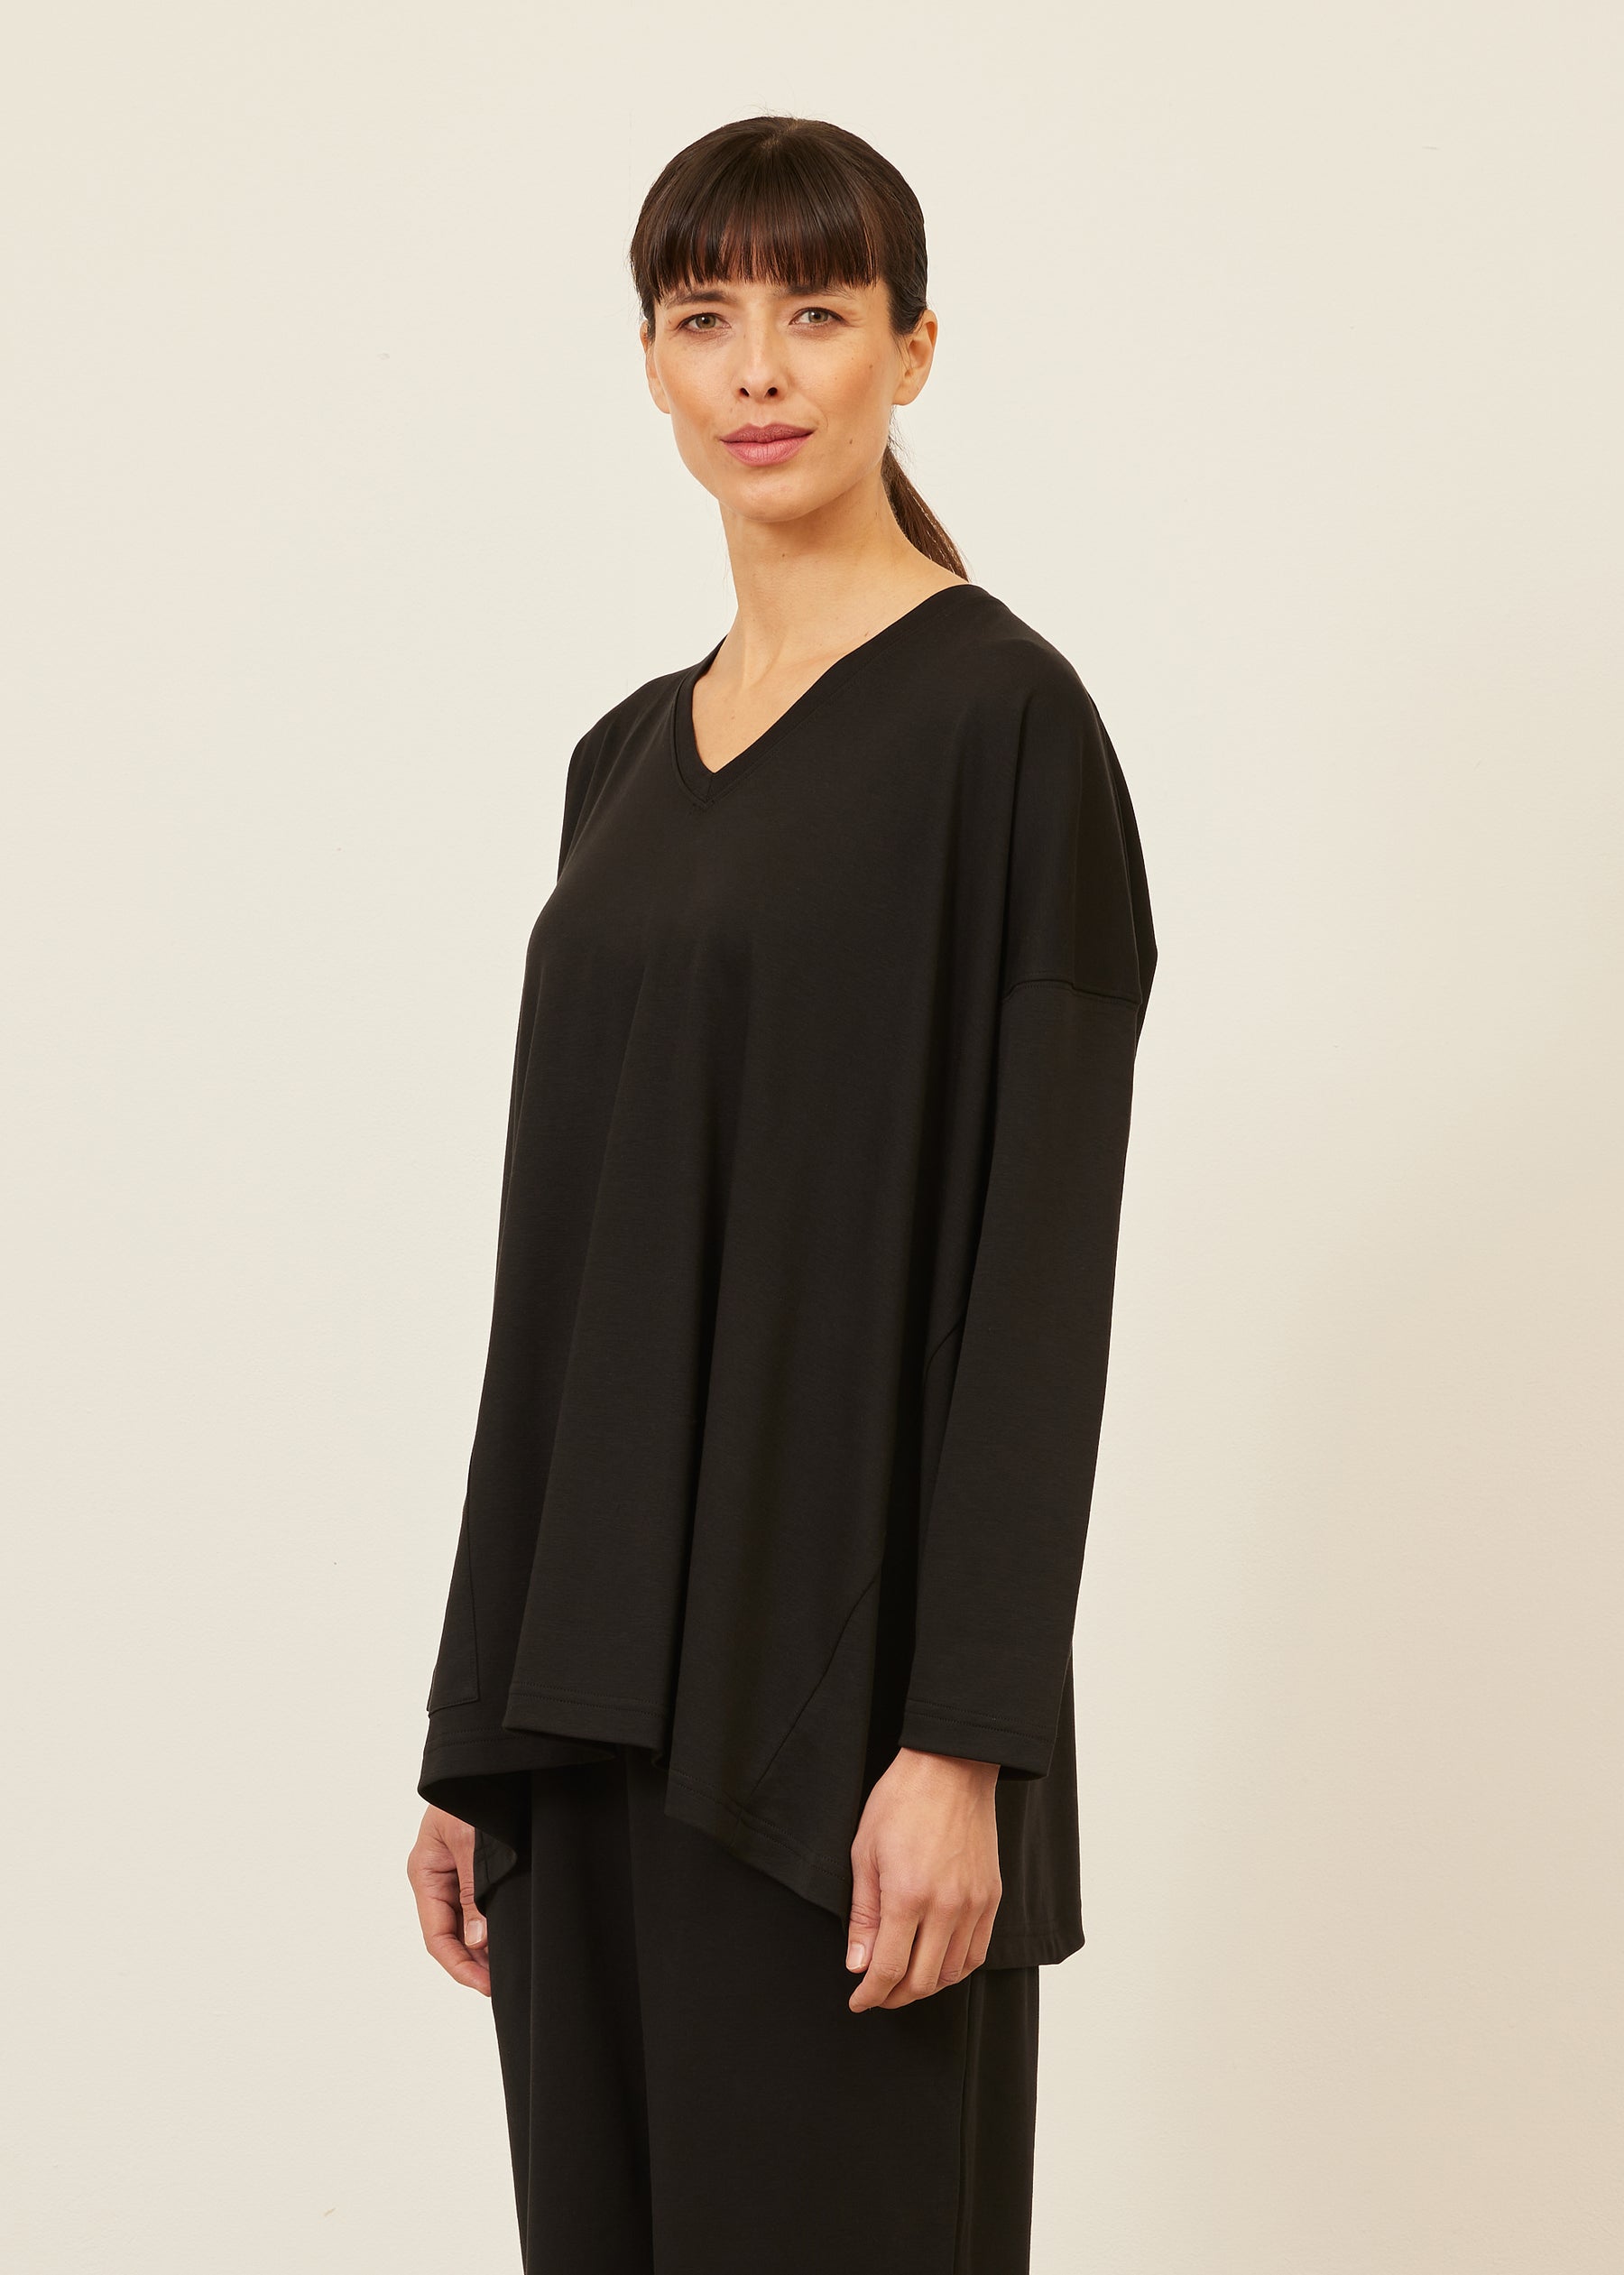 one pocket angle-to-front v neck - long